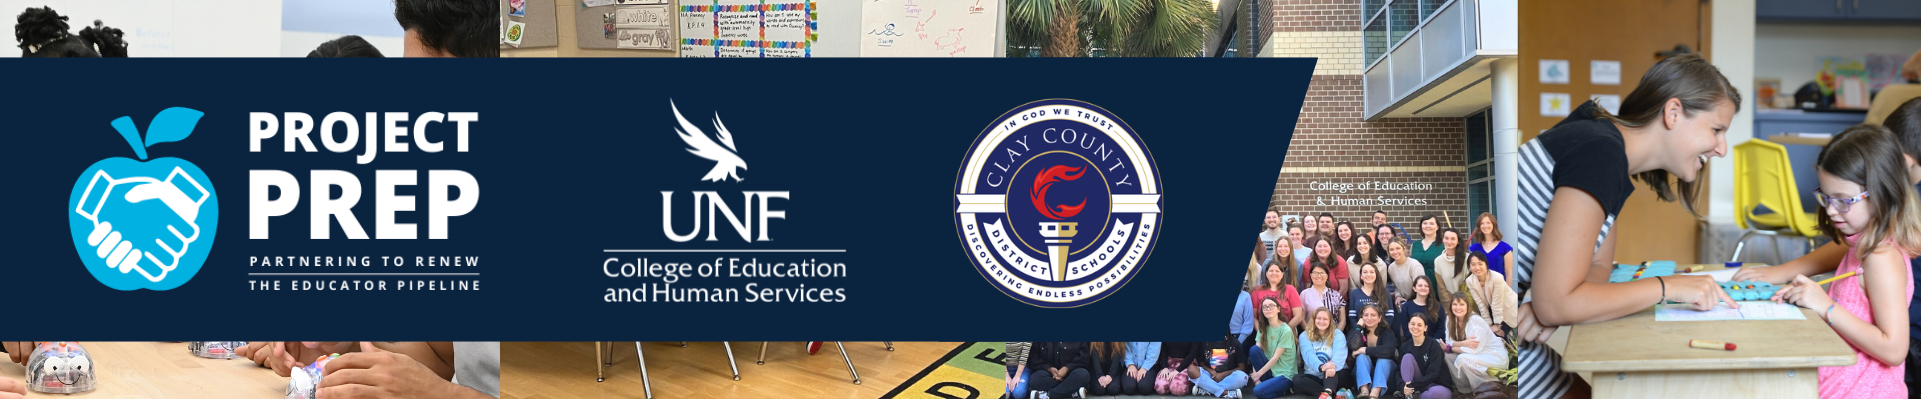 Project Prep logo, the UNF COEHS logo, and the Clay County emblem on top of student photo collage